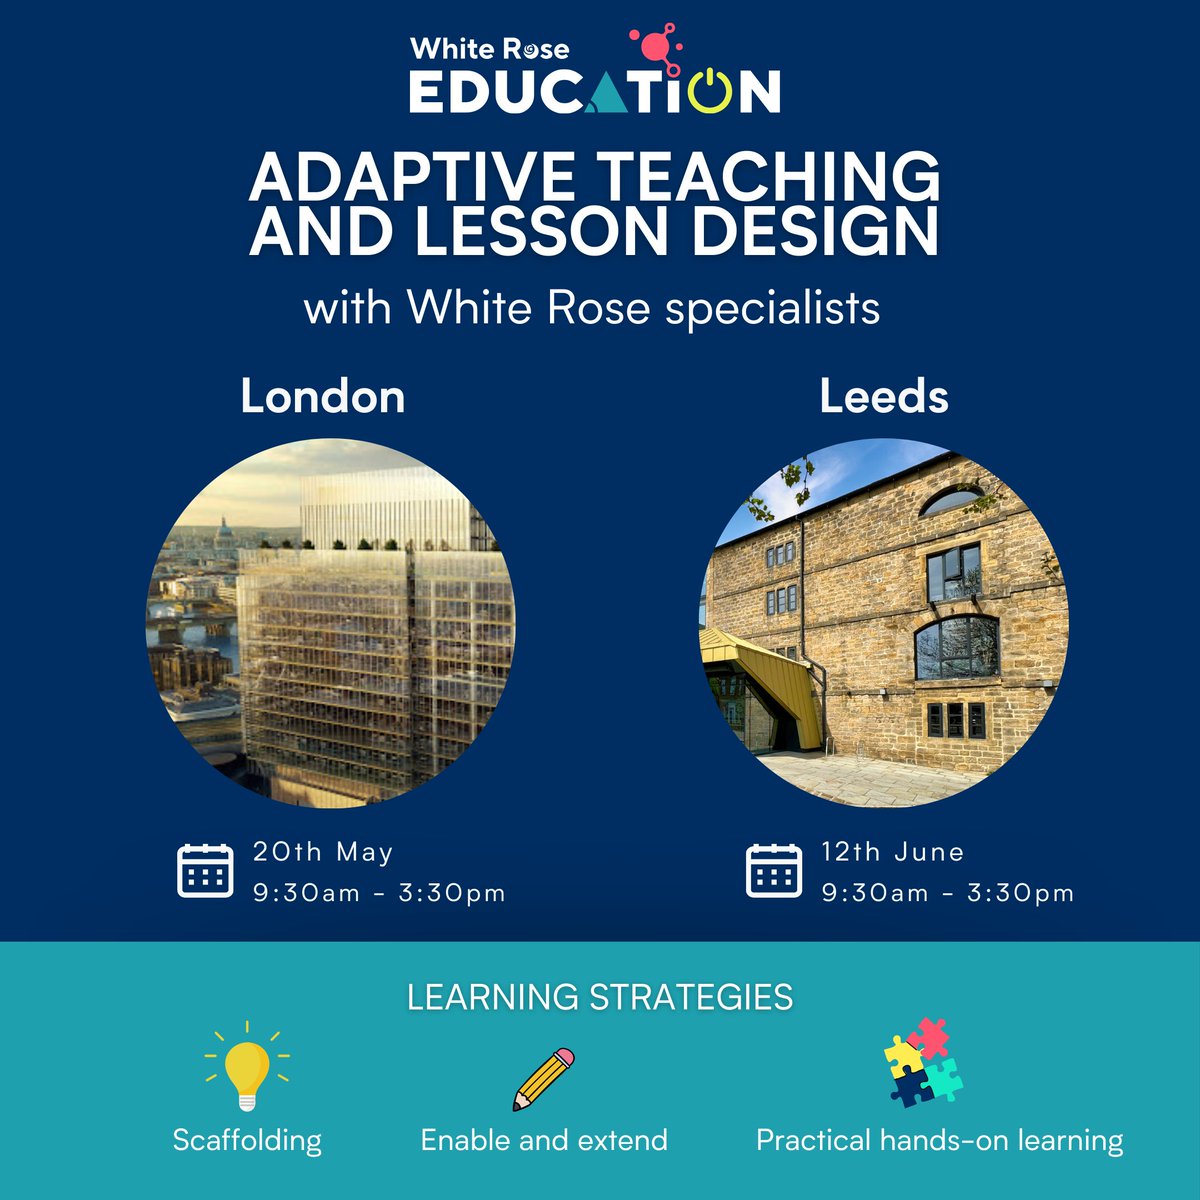 Join us in London or Leeds for LIVE Adaptive teaching and lesson design workshops ⭐️ Learn effective strategies from our specialists and transform your classrooms to give your pupil's your best! Book now 🎟️ London: eu1.hubs.ly/H096zhR0 Leeds: eu1.hubs.ly/H096z190